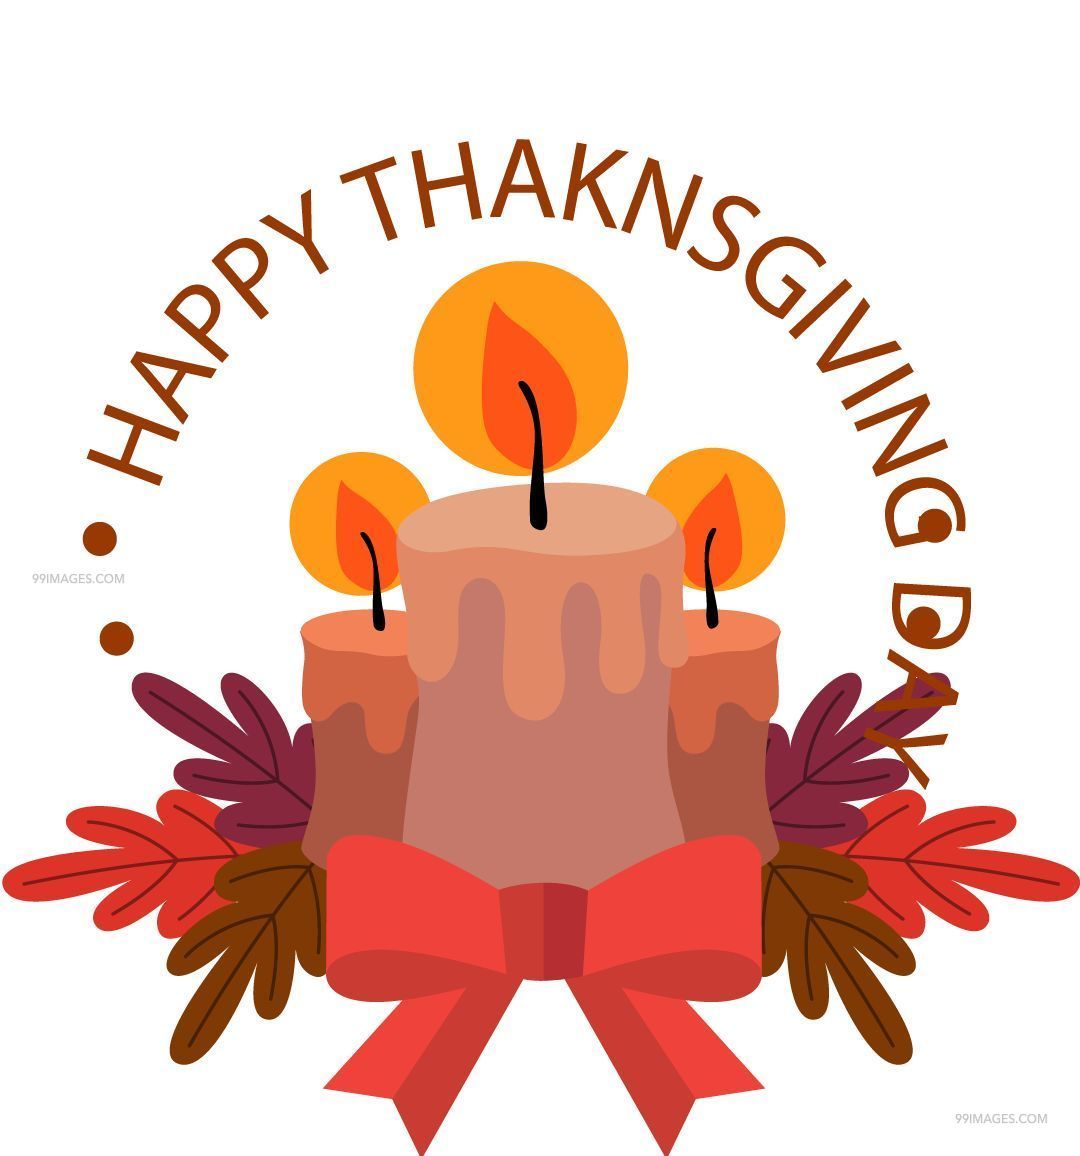 [28th November 2019] Beautiful Happy Thanksgiving Day Image, Quotes, Wishes, Messages, Wallpaper HD (Turkey, Food, Leaves, Family) (1080x1156) (2020)